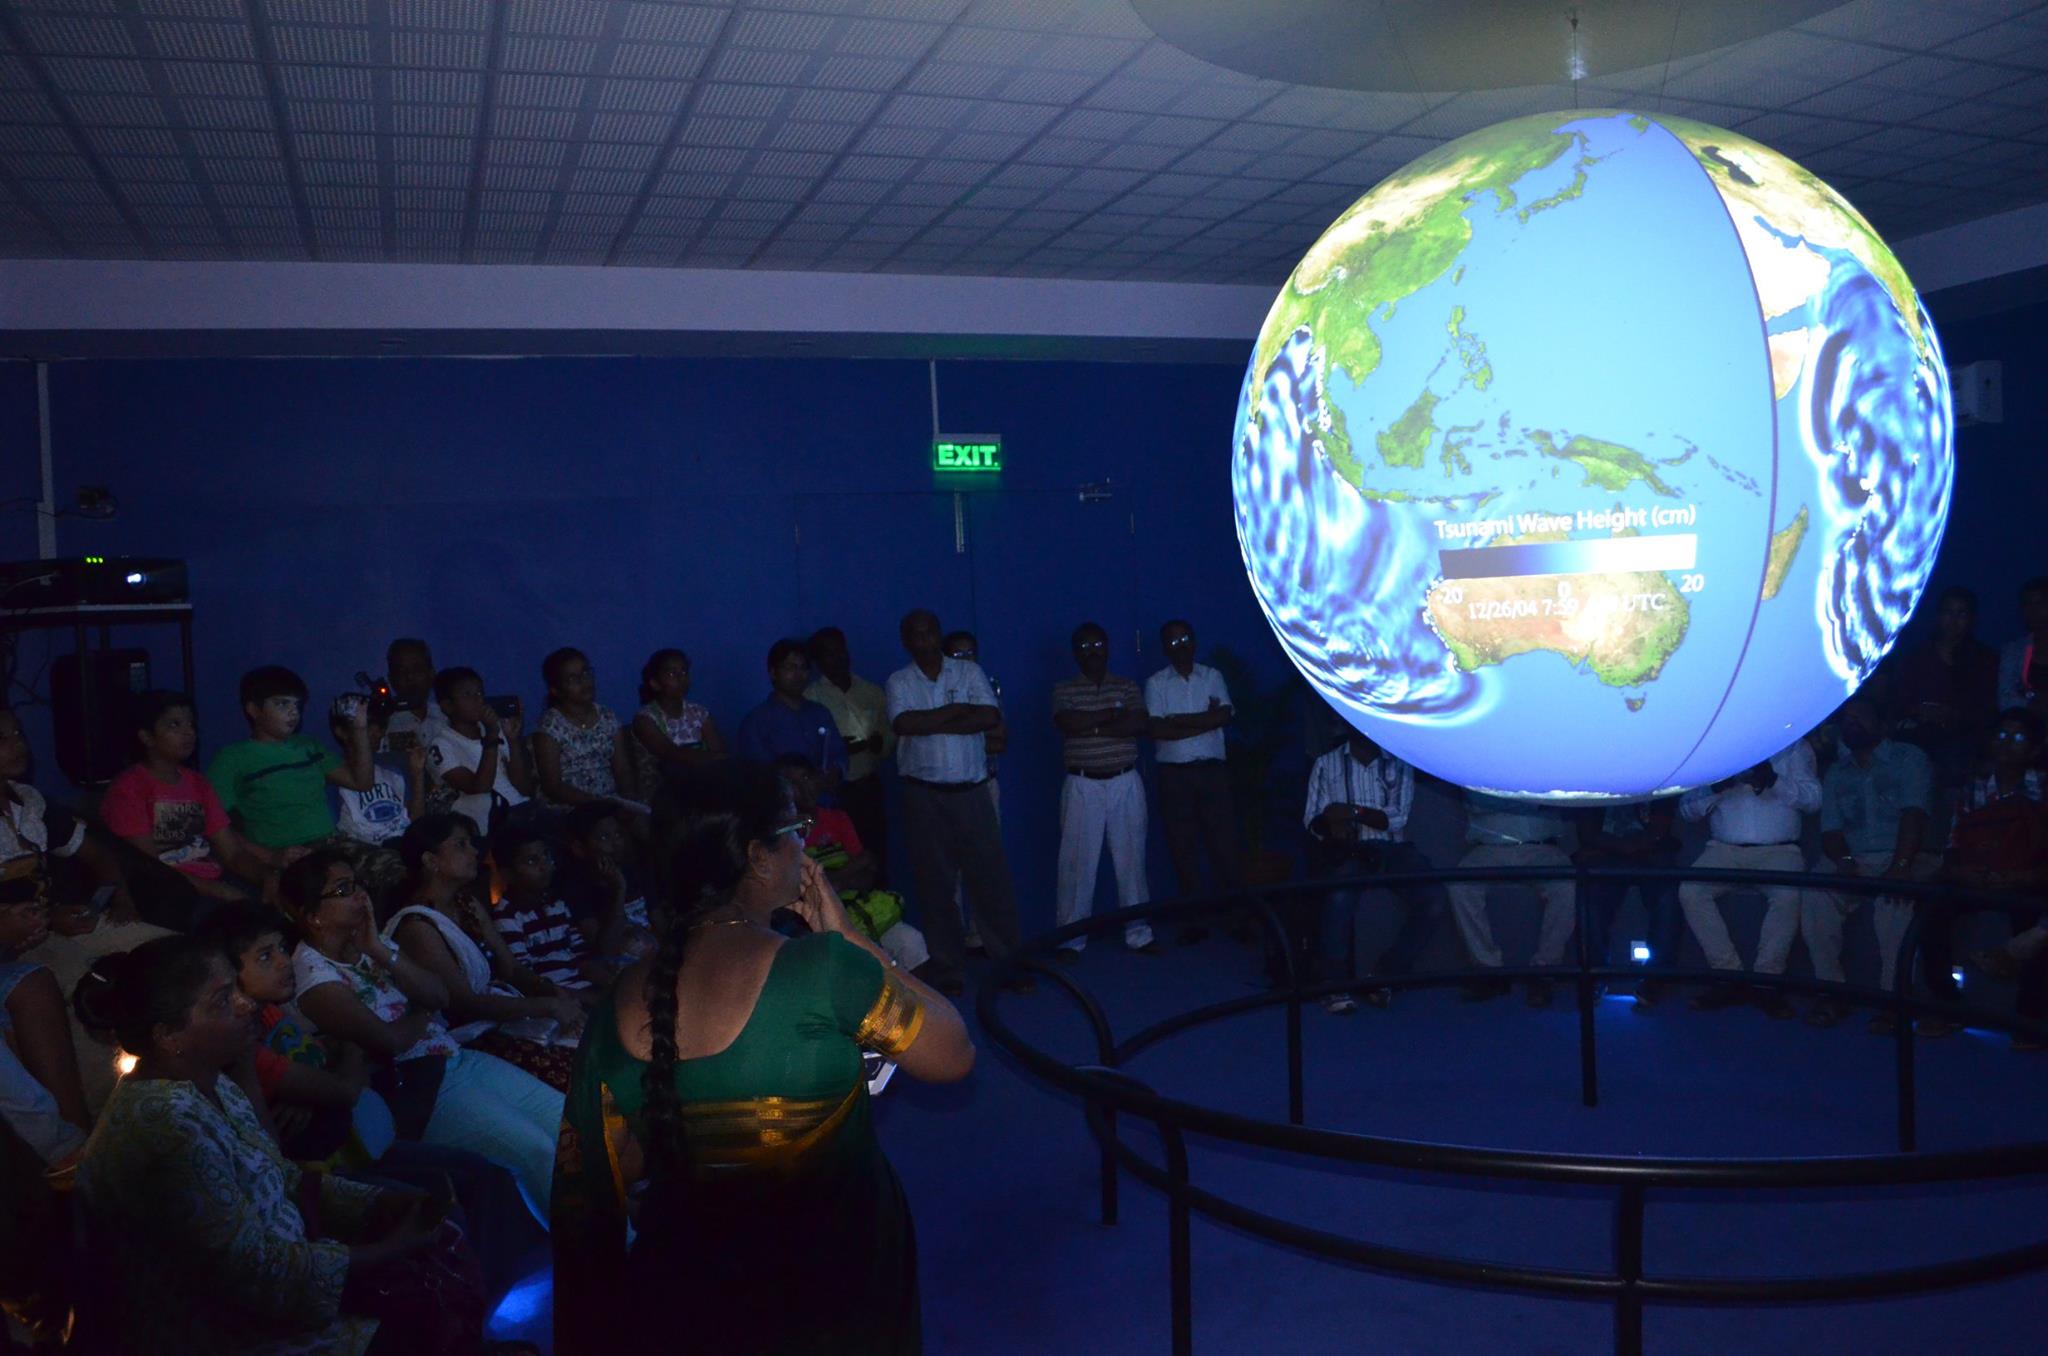 A group of people watch Science On a Sphere as it displays data from a tsunami in the Indian Ocean. The Sphere's display is split so that the two hemispheres of the Sphere show the same data, rather than a complete image of the Earth